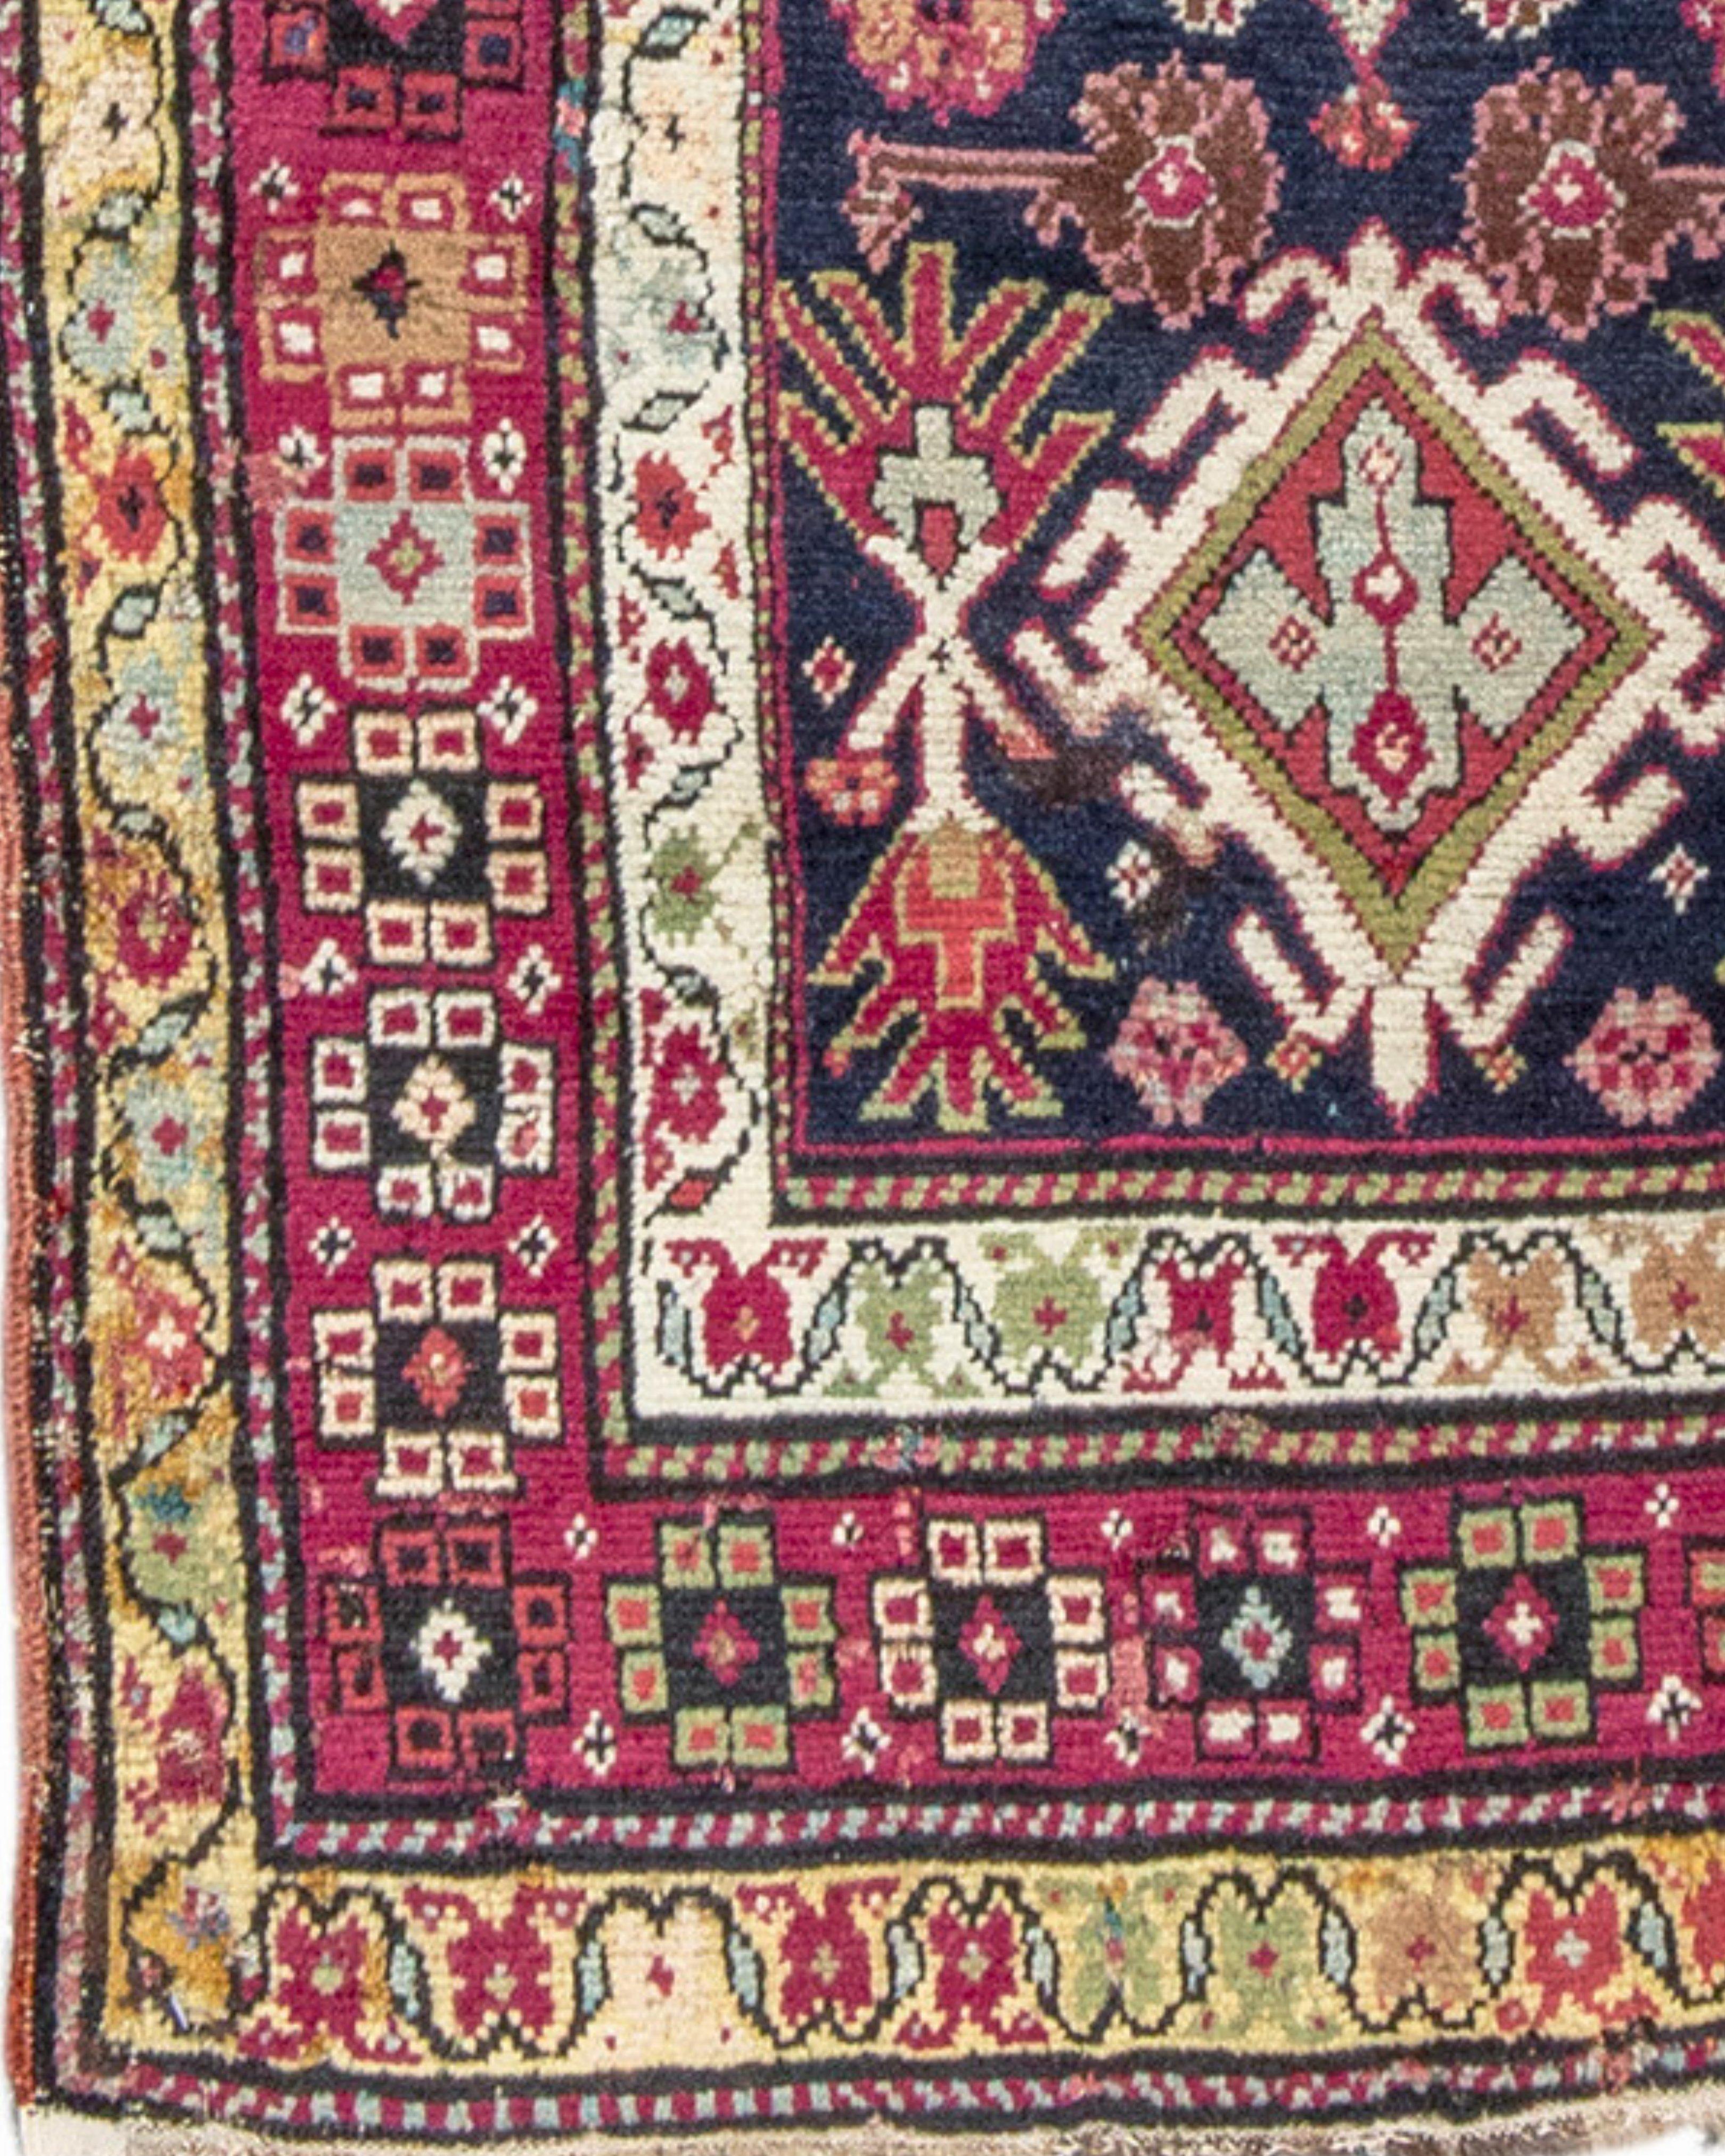 Hand-Woven Antique Persian Karabagh Prayer Rug, 19th Century For Sale